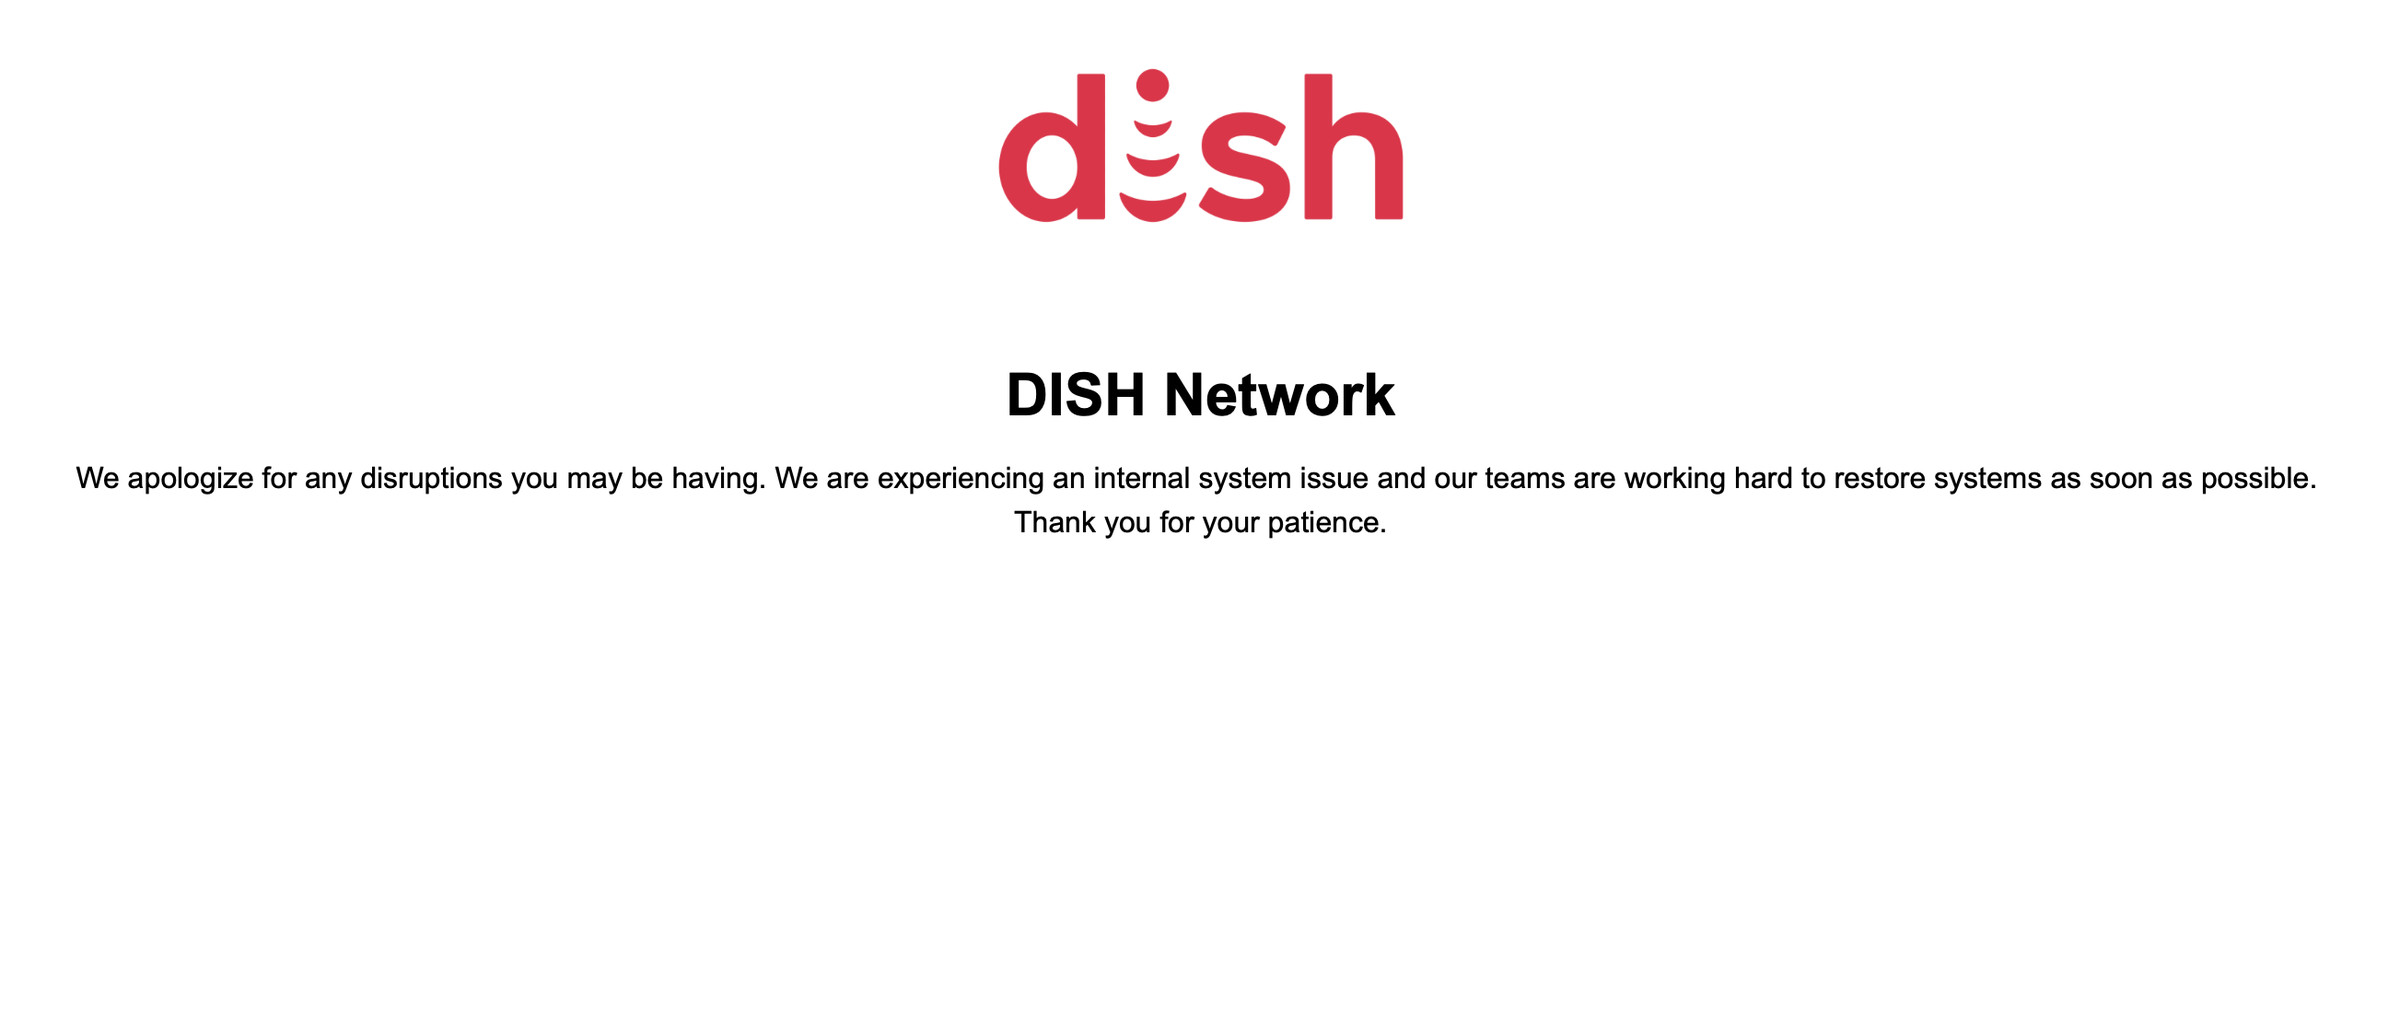 Screenshot of Dish's website with the text: “We apologize for any disruptions you may be having.  We are experiencing an internal system issue and our teams are working hard to restore systems as soon as possible. Thank you for your patience.”